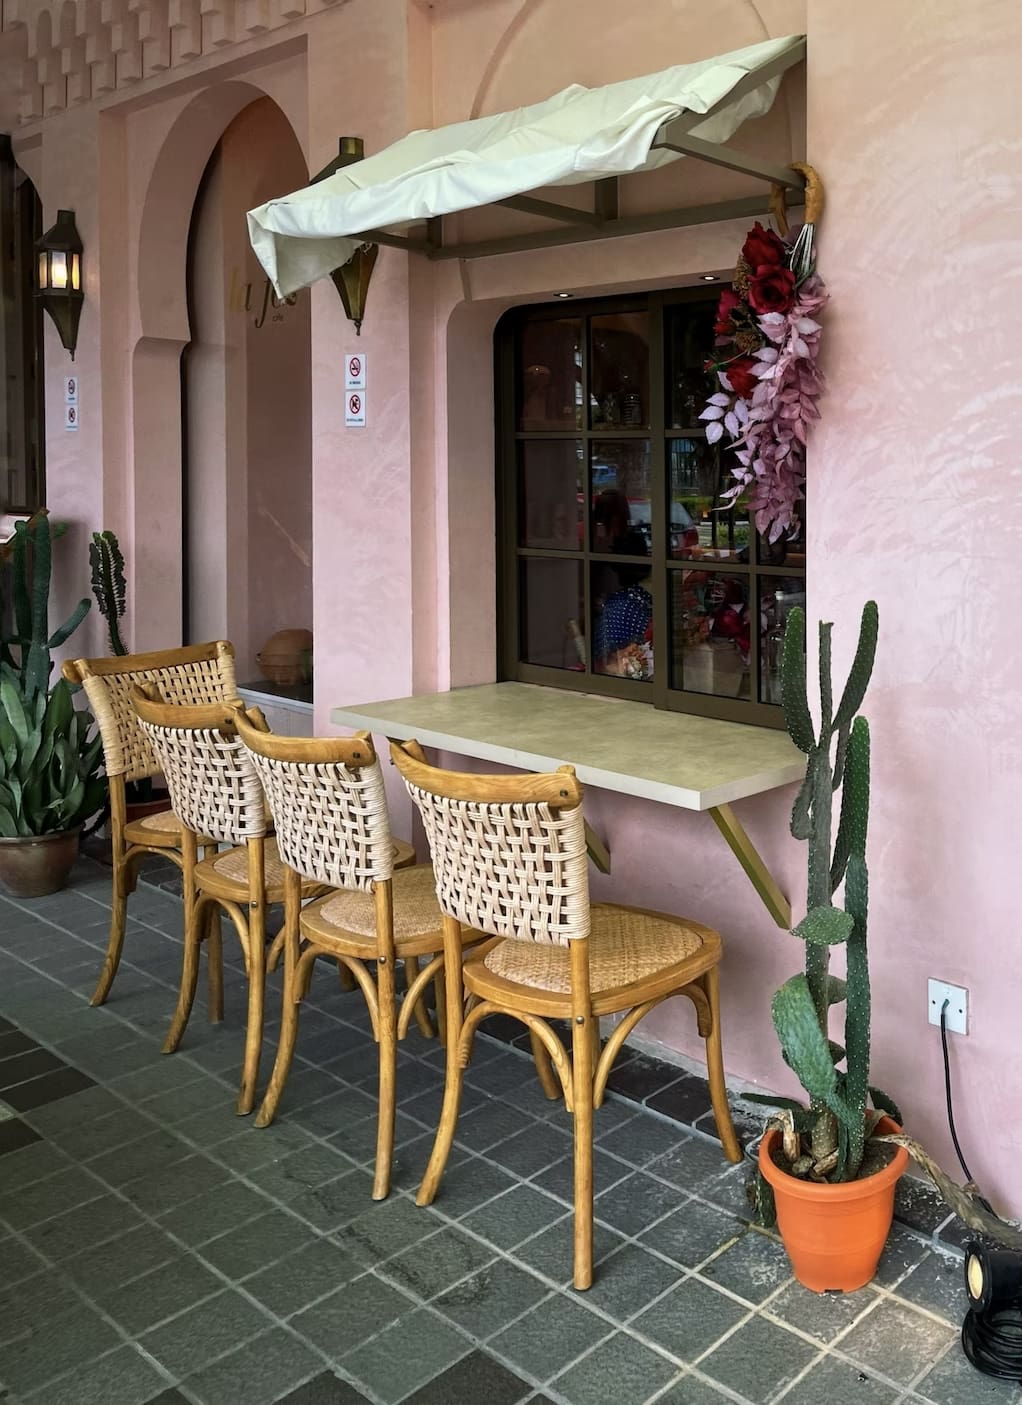 cacti placed near the window, wooden chairs, pink walls, floor tiles